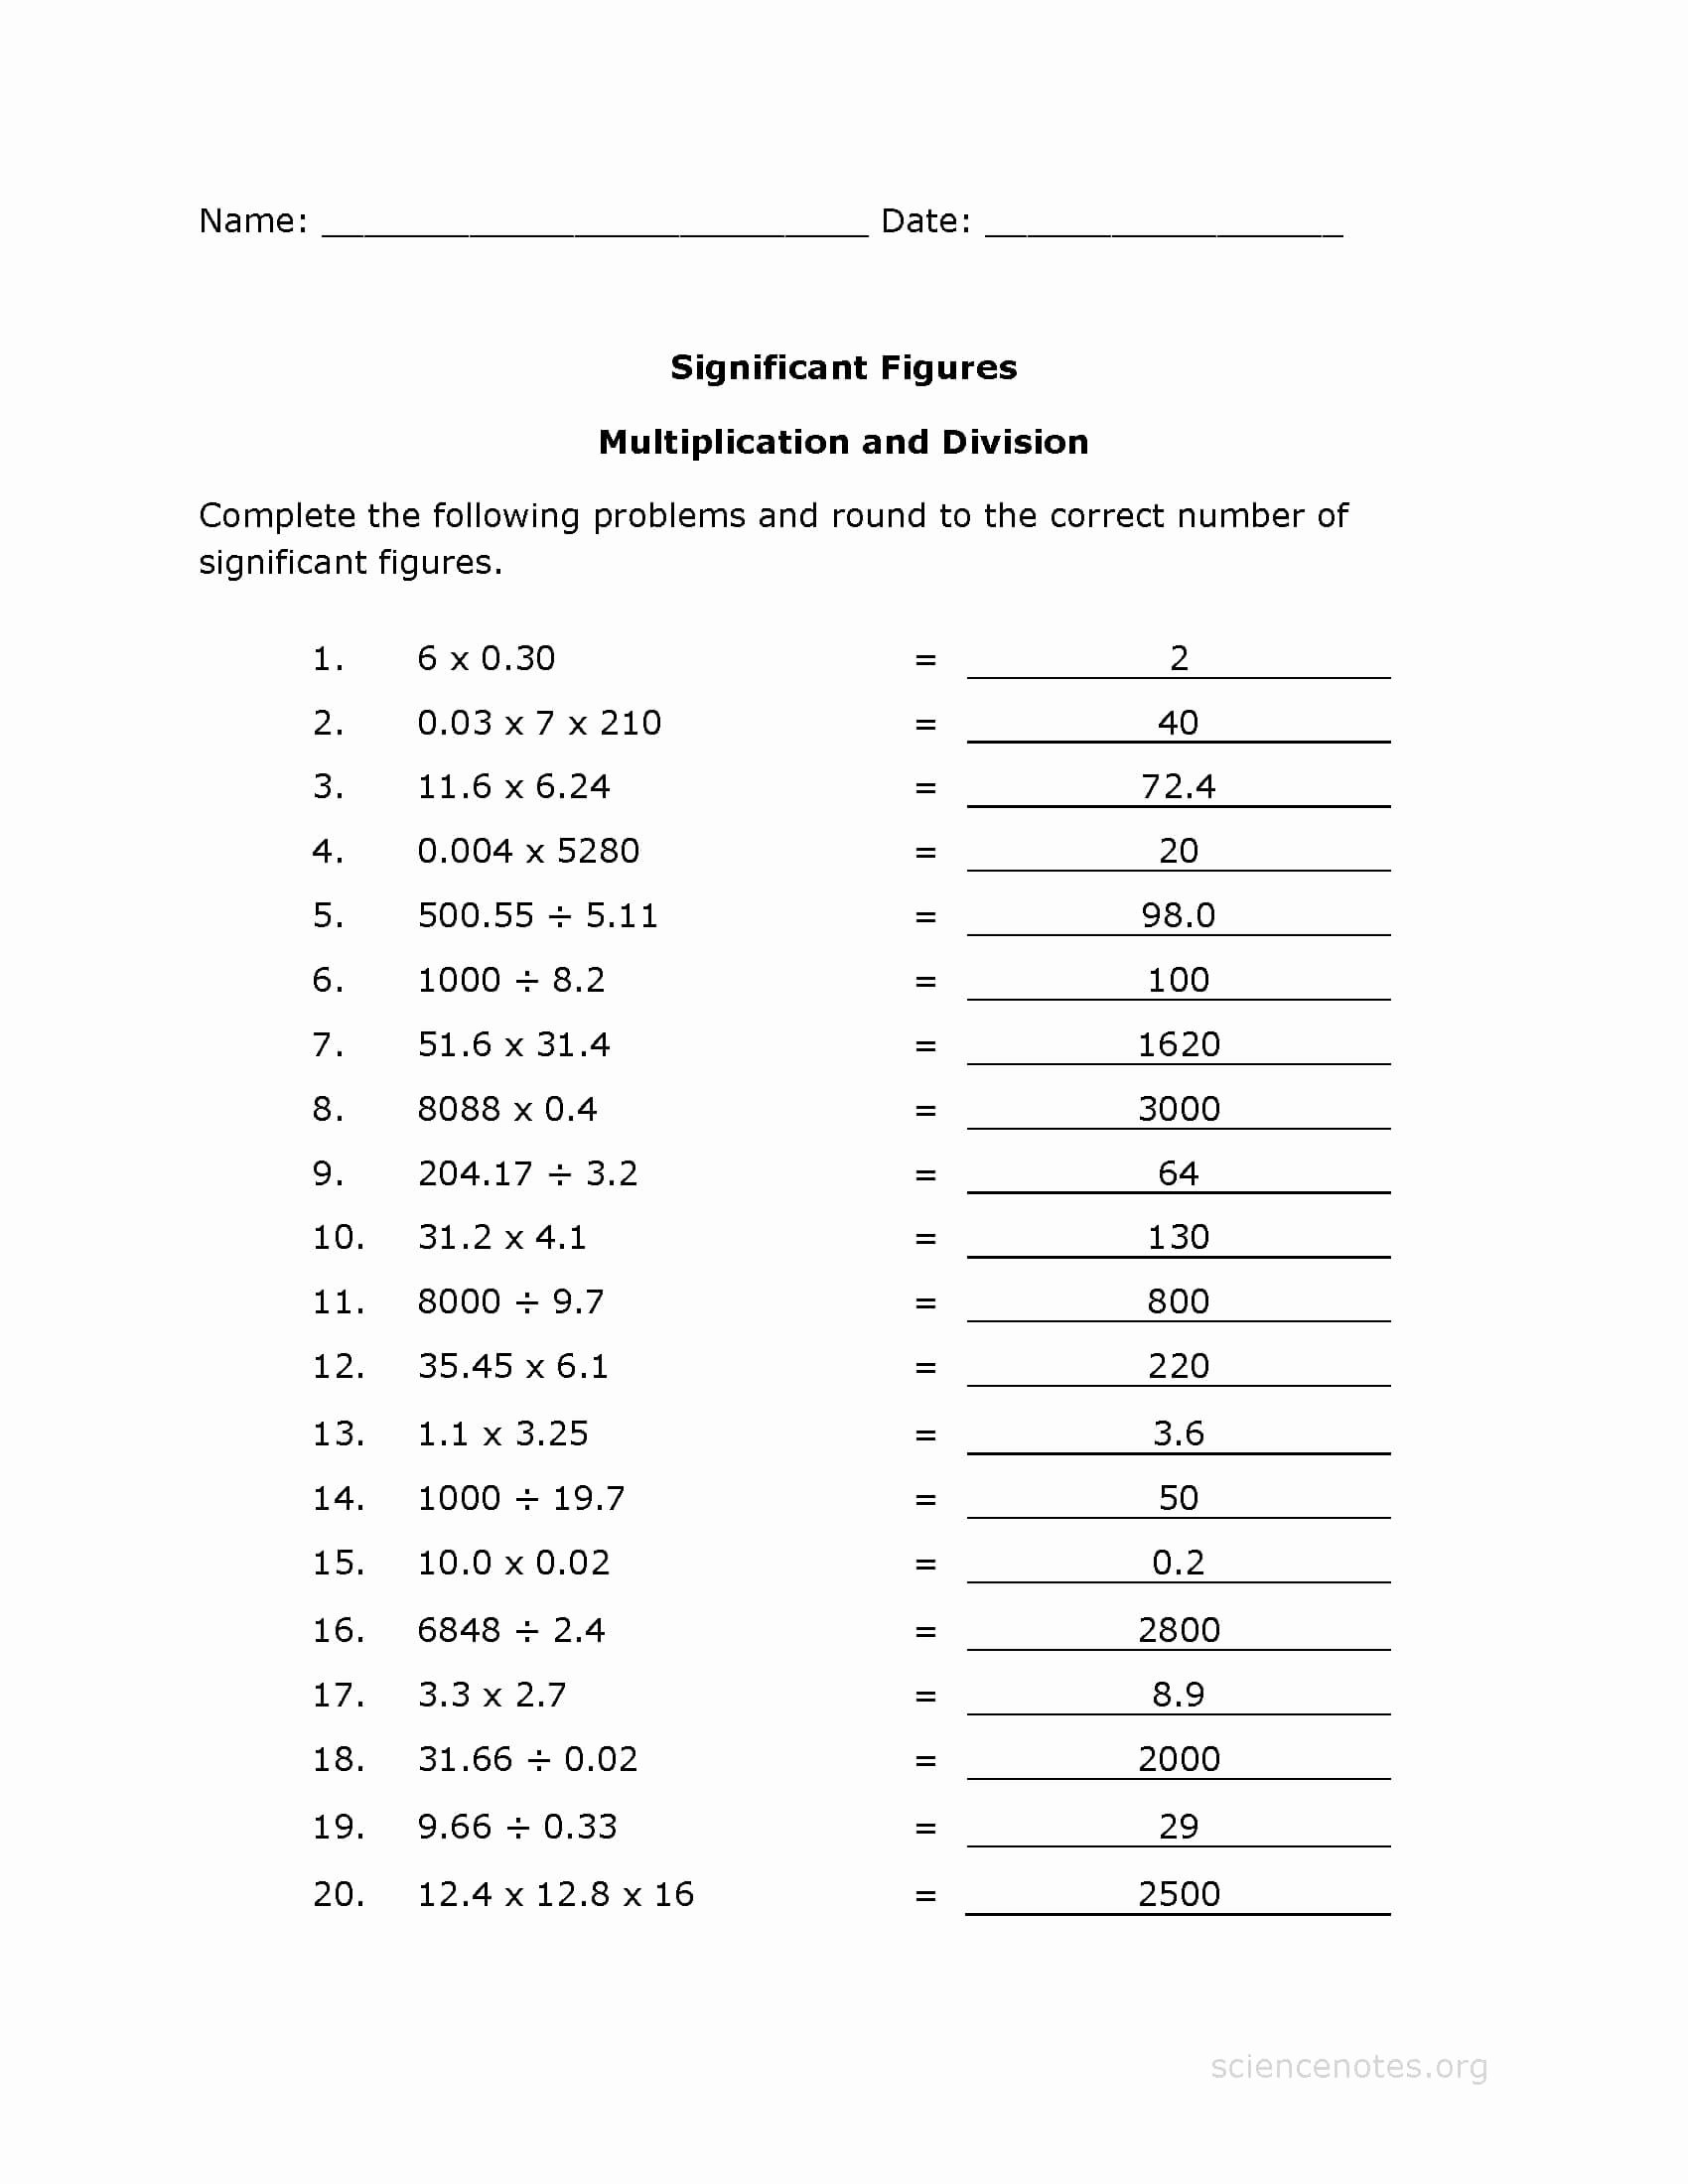 Significant Figures Practice Worksheet Beautiful Significant Figures Multiplication Worksheet Page 2 Of 2